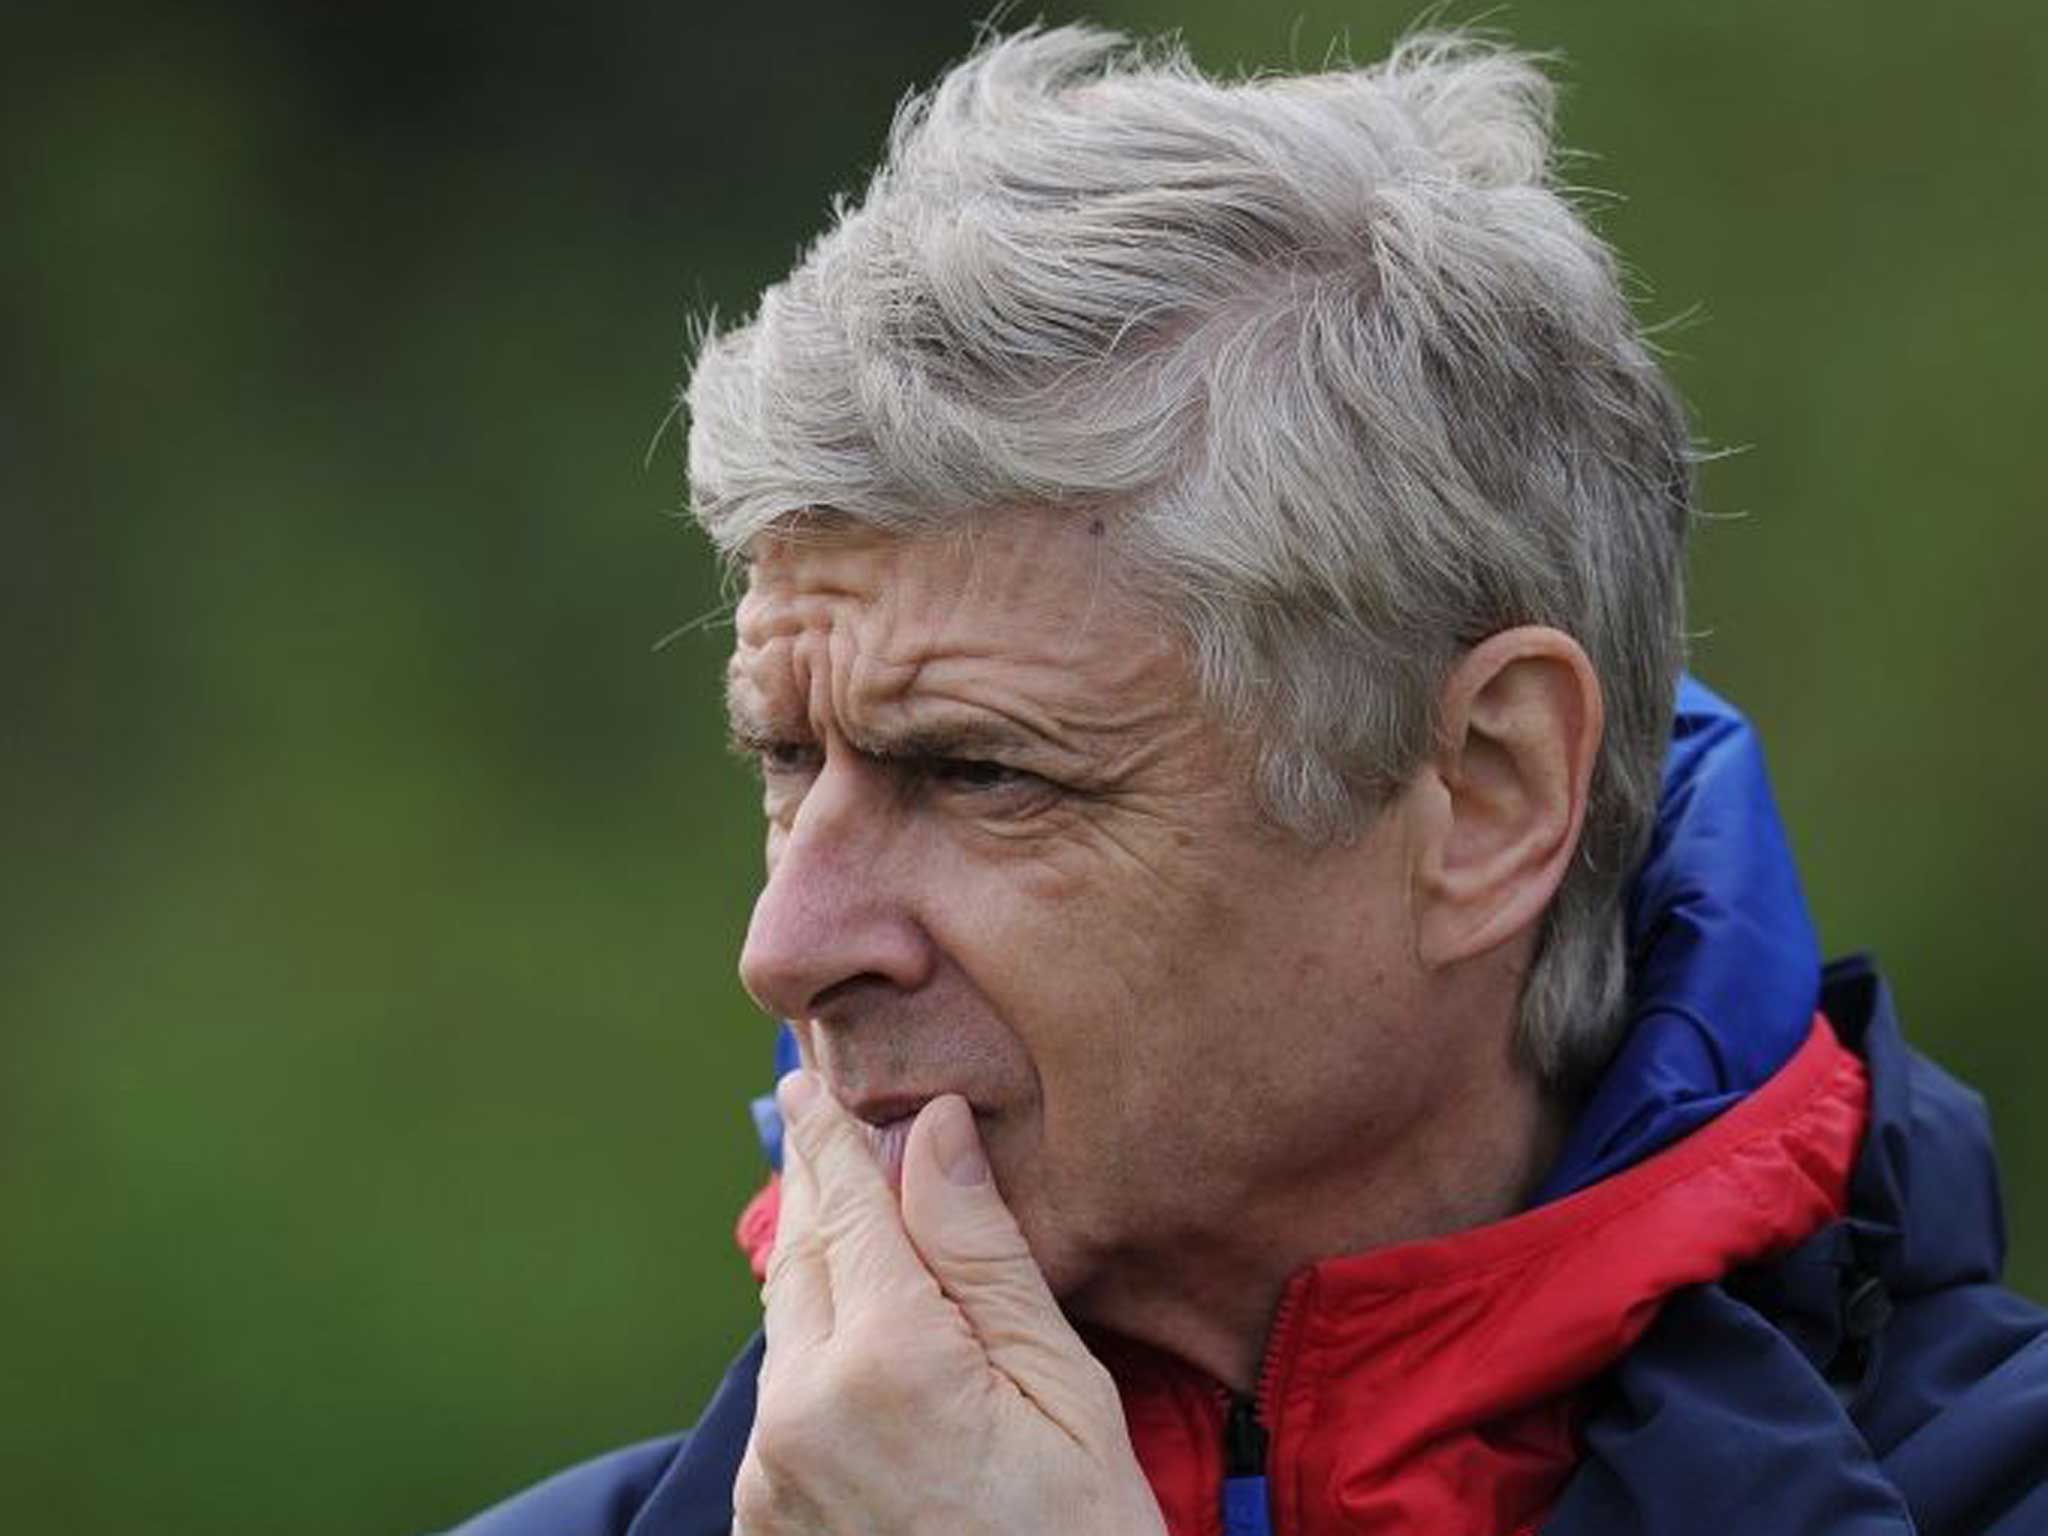 Wenger at a training session earlier this week: He has called for a review of the Premier League player loan system